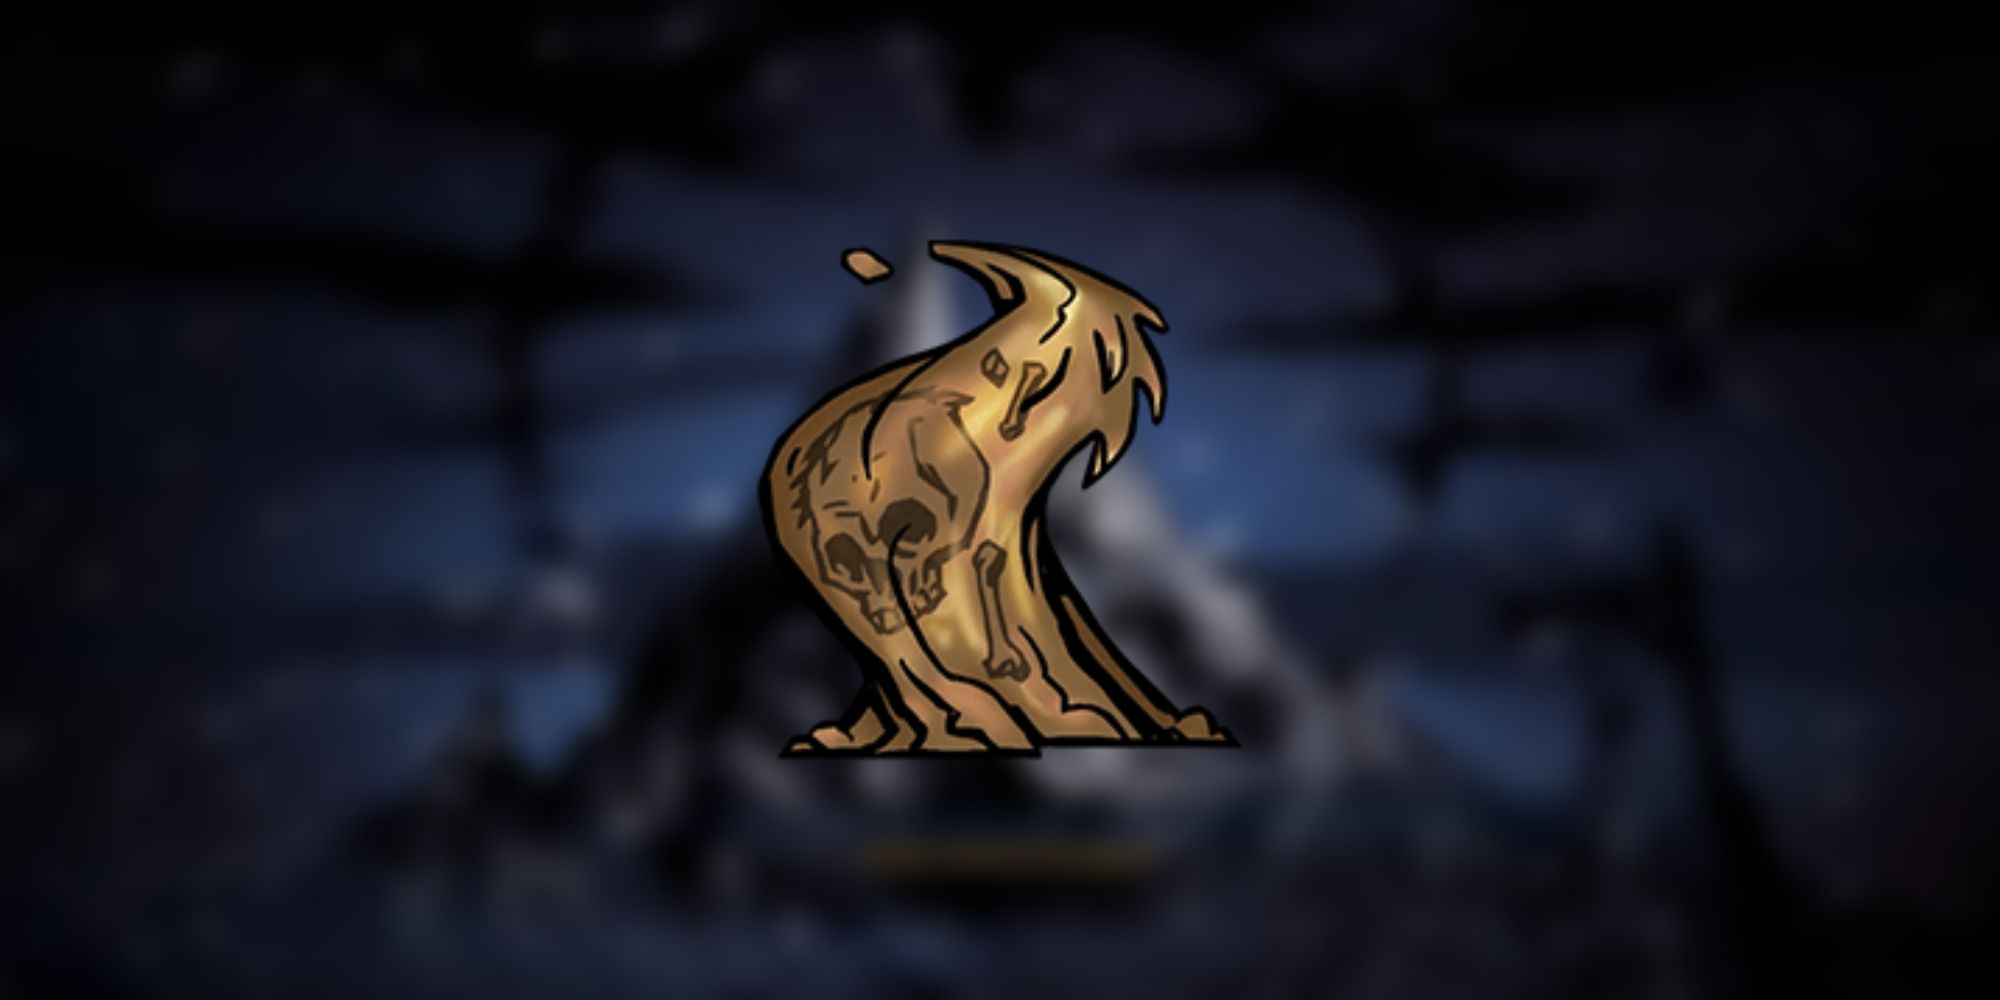 An image of the Mucilaginous Slime Pet from Darkest Dungeon 2